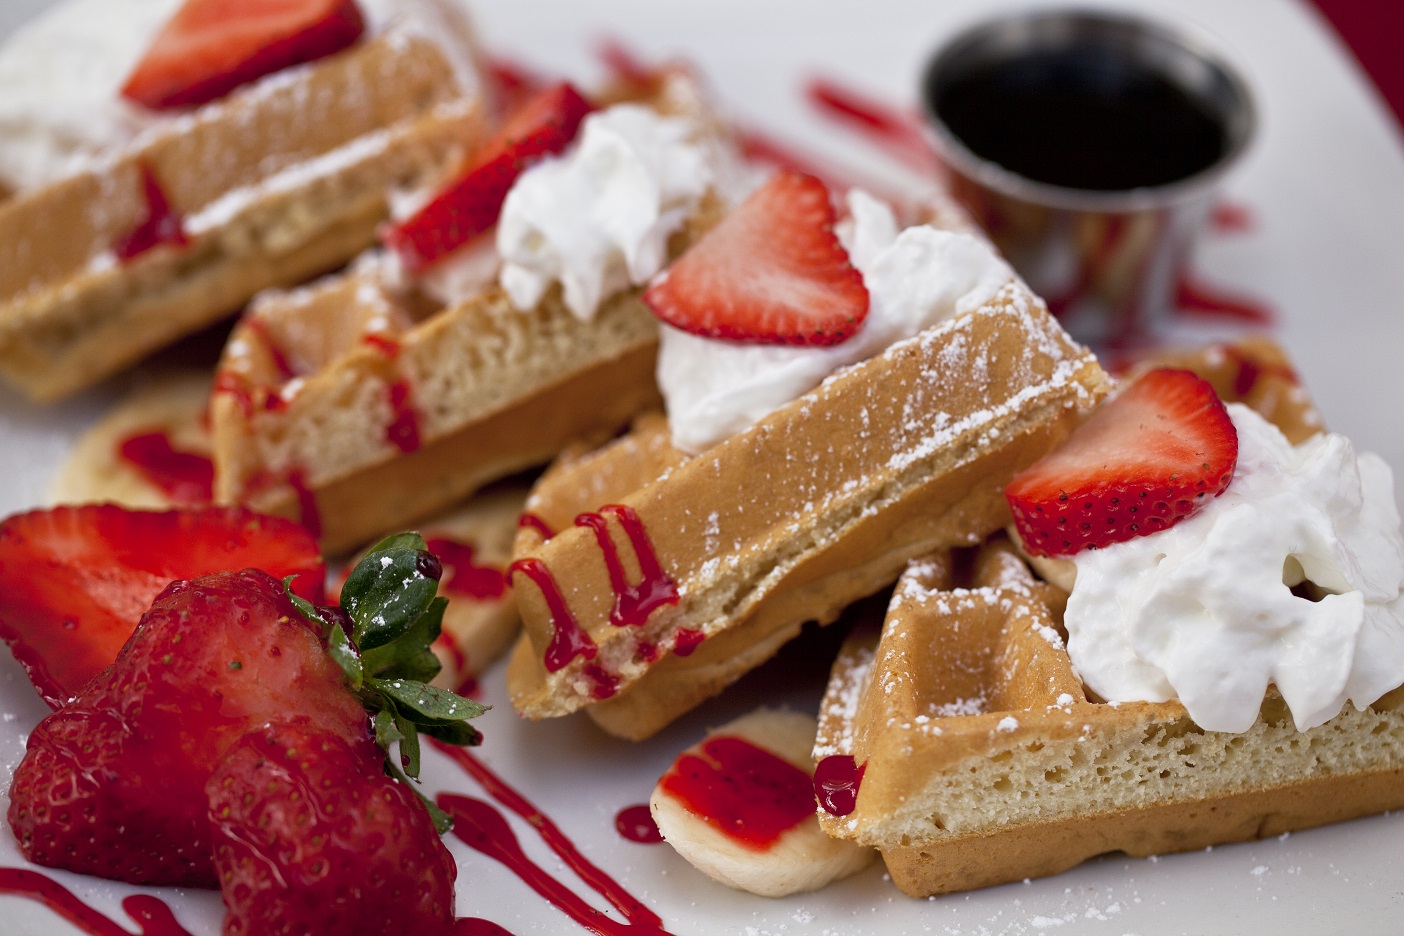 One of the most popular dishes, the Wedge Waffles